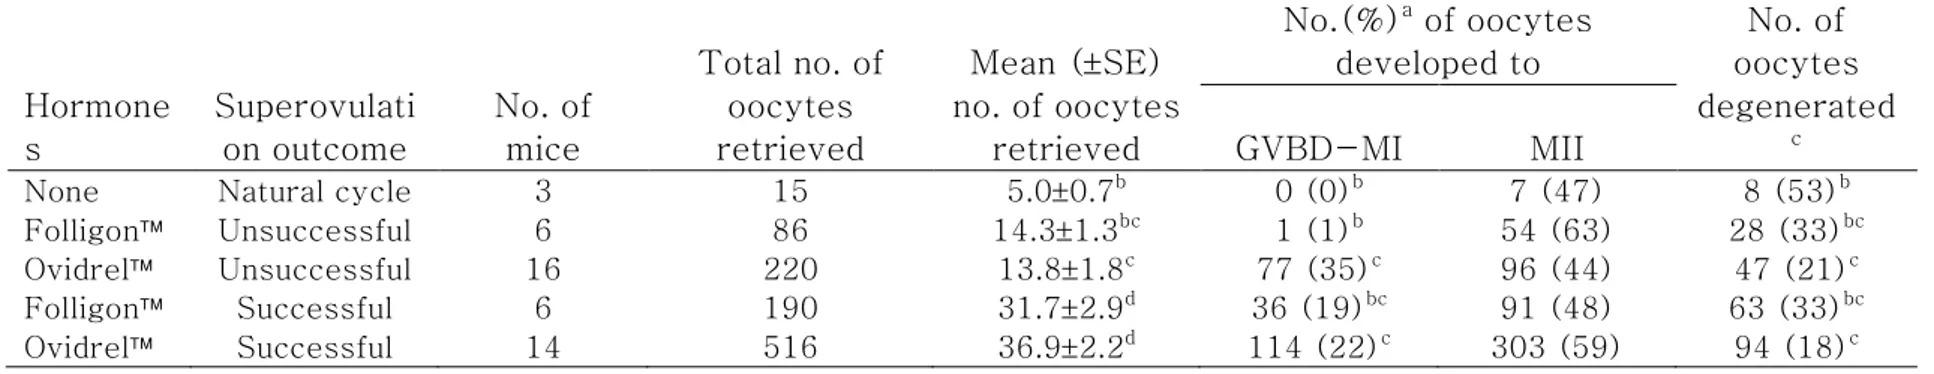 Table 1. Maturational status of oocytes retrieved from the mice superovulated with different gonadotrophins